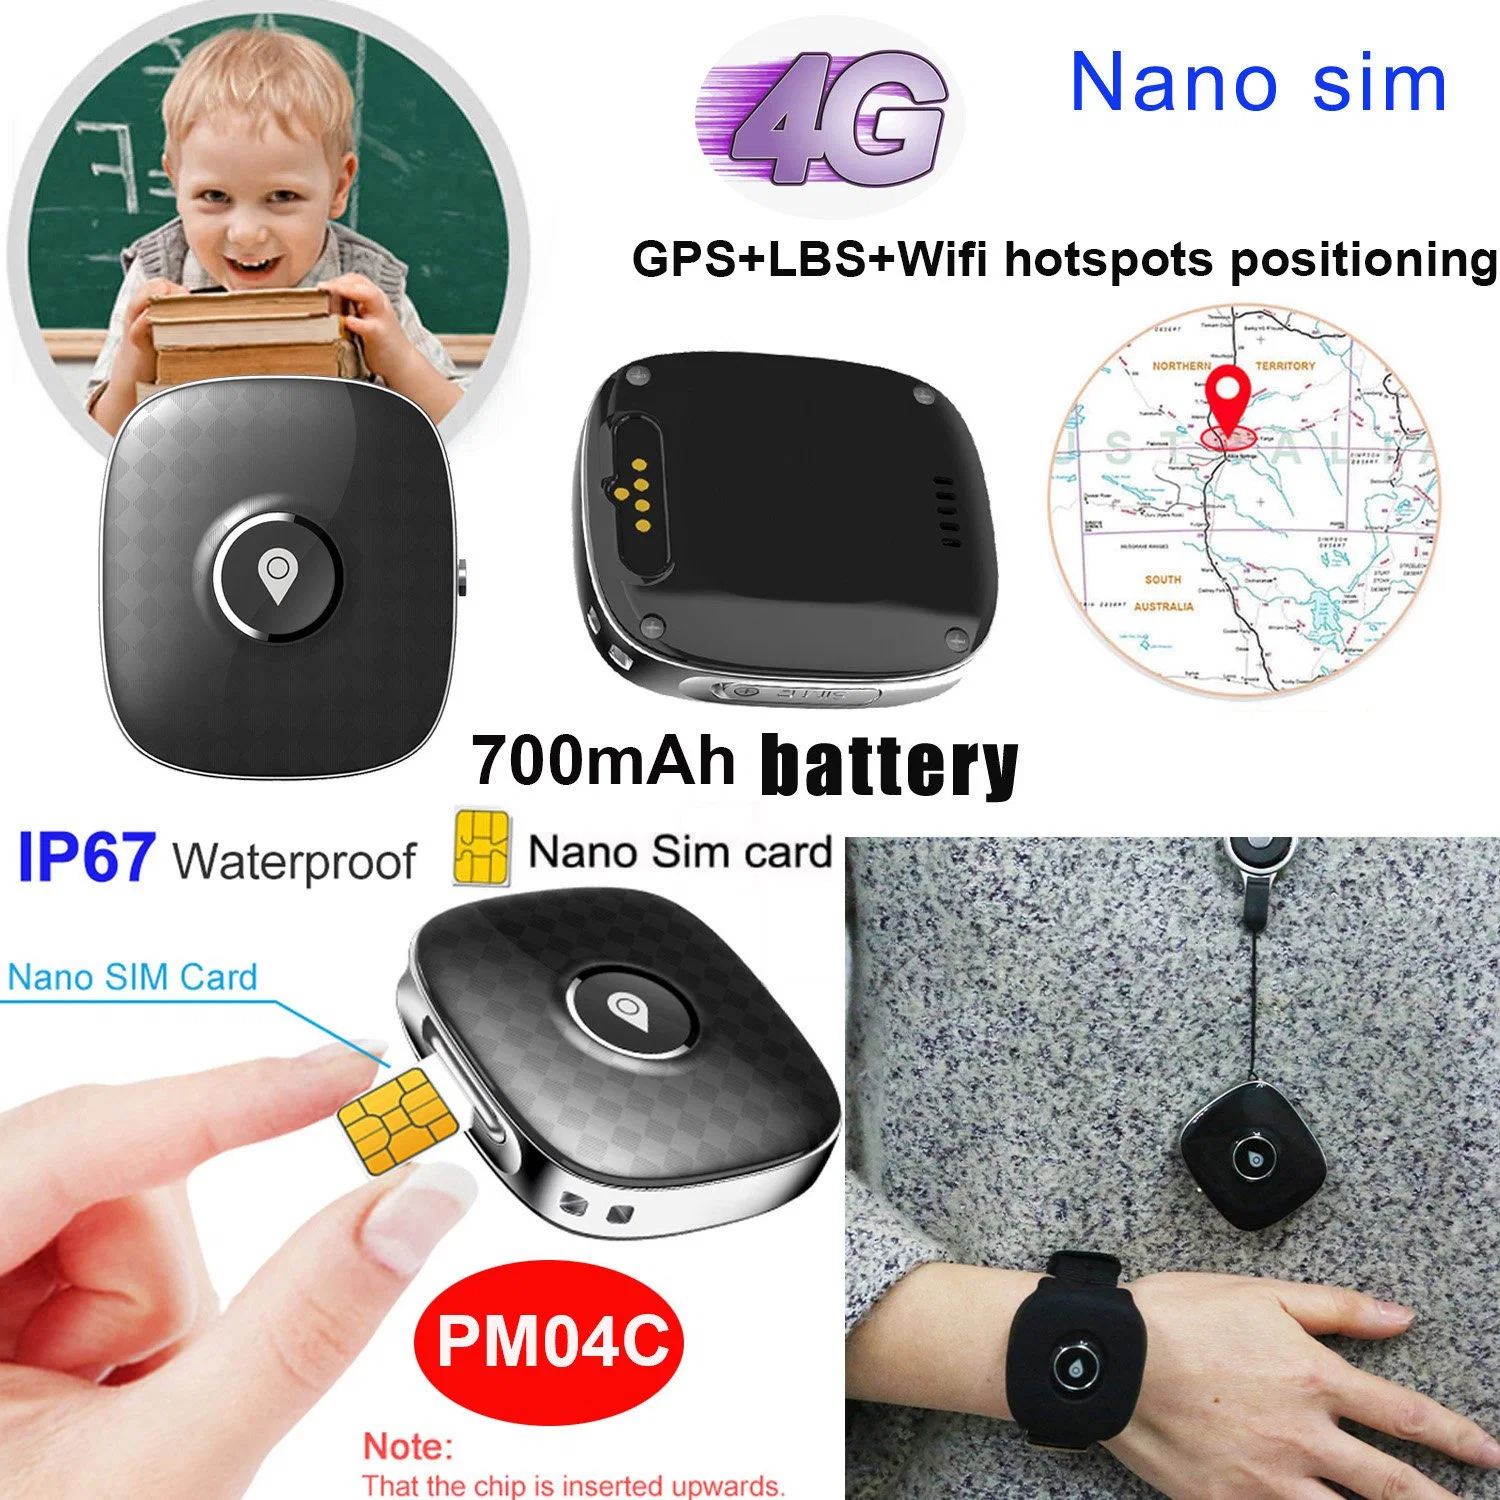 New 4G LTE  IP67 Waterproof Portable Wearable Mini GPS Tracker device with GPS Lbs WiFi Location Remote Monitor for Safety Monitoring PM04C